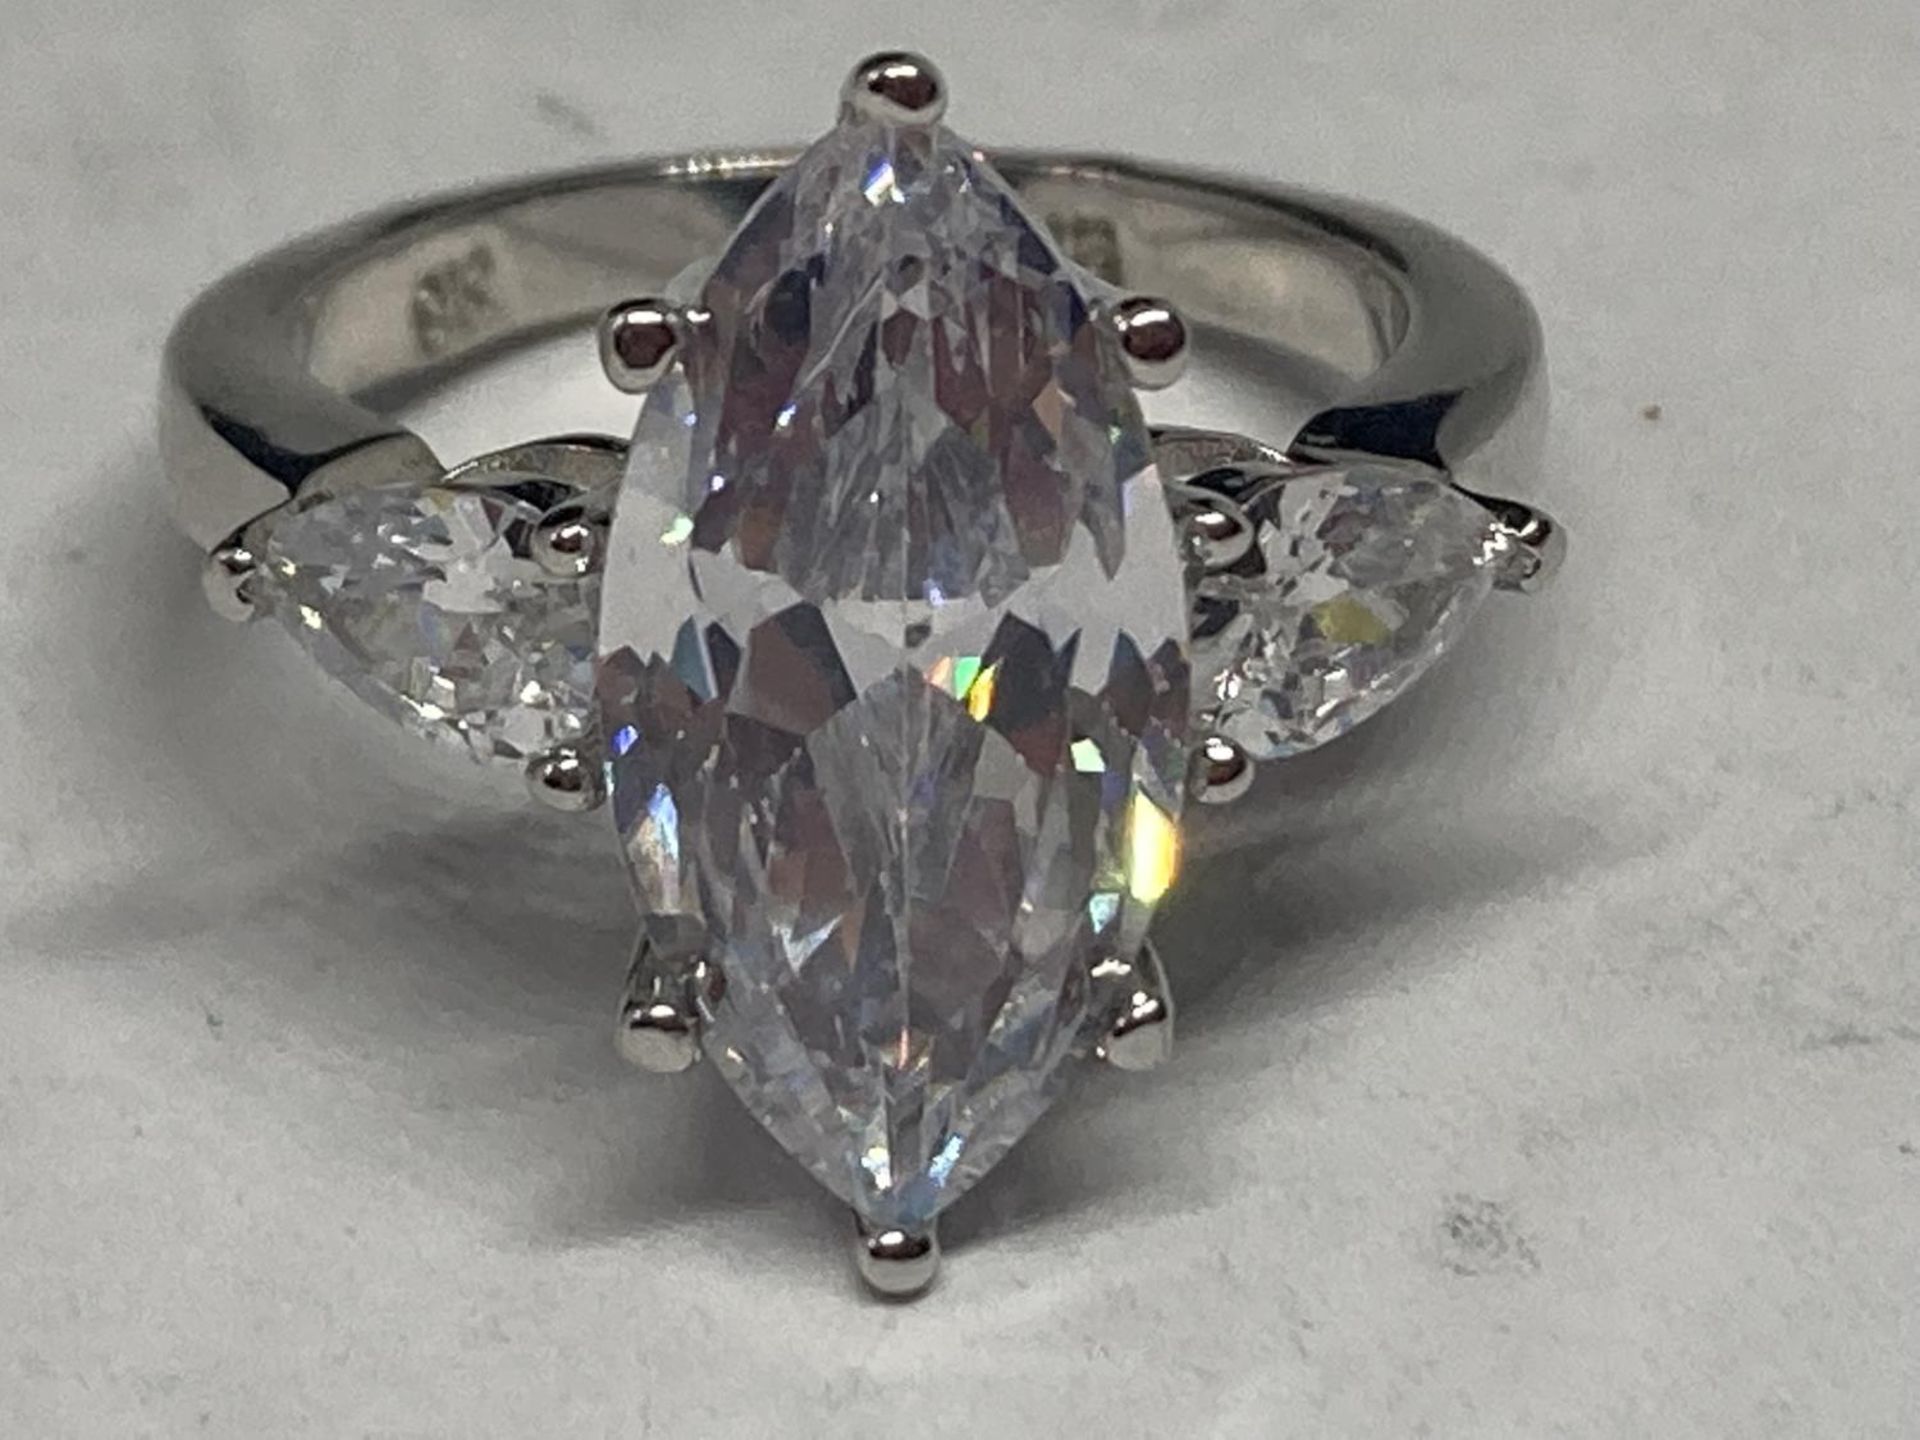 A MARKED 9K RING WITH 5 CARATS OF MOISSANITE SIZE L/M GROSS WEIGHT 4.85 GRAMS